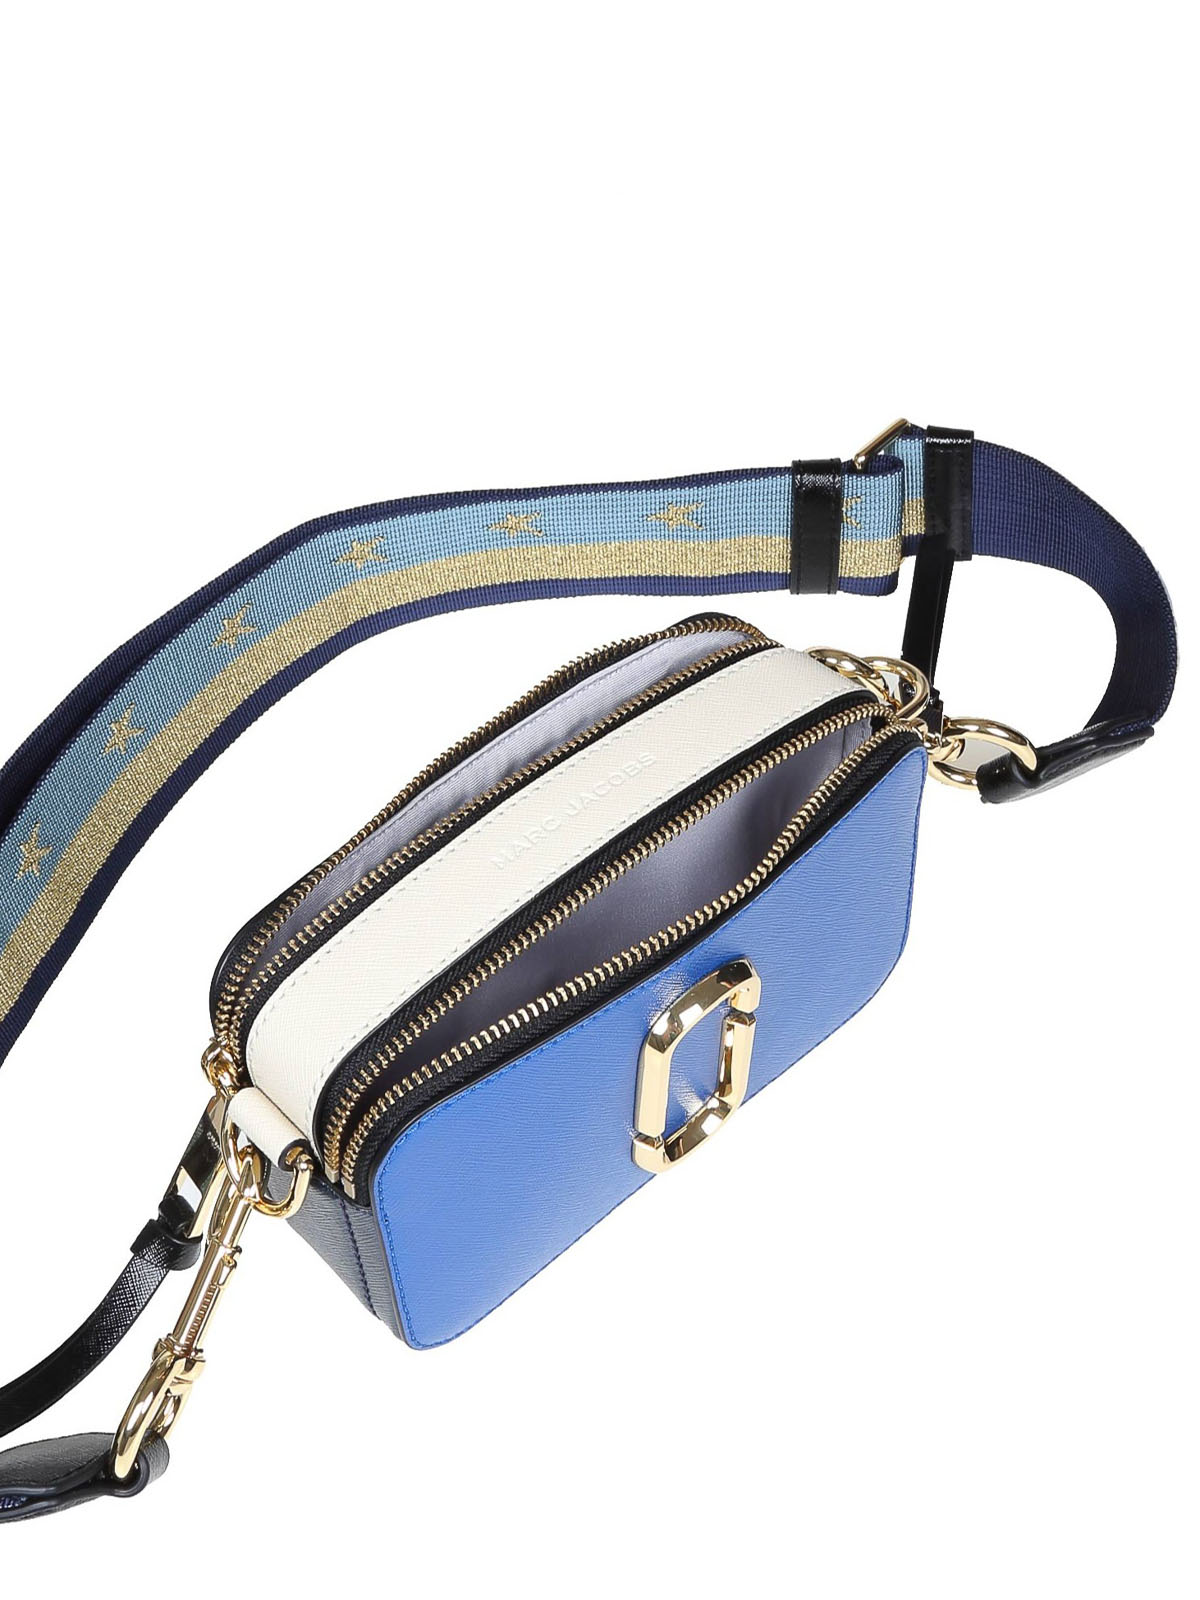 MARC JACOBS: The Snapshot bag in tricolor saffiano leather - Navy